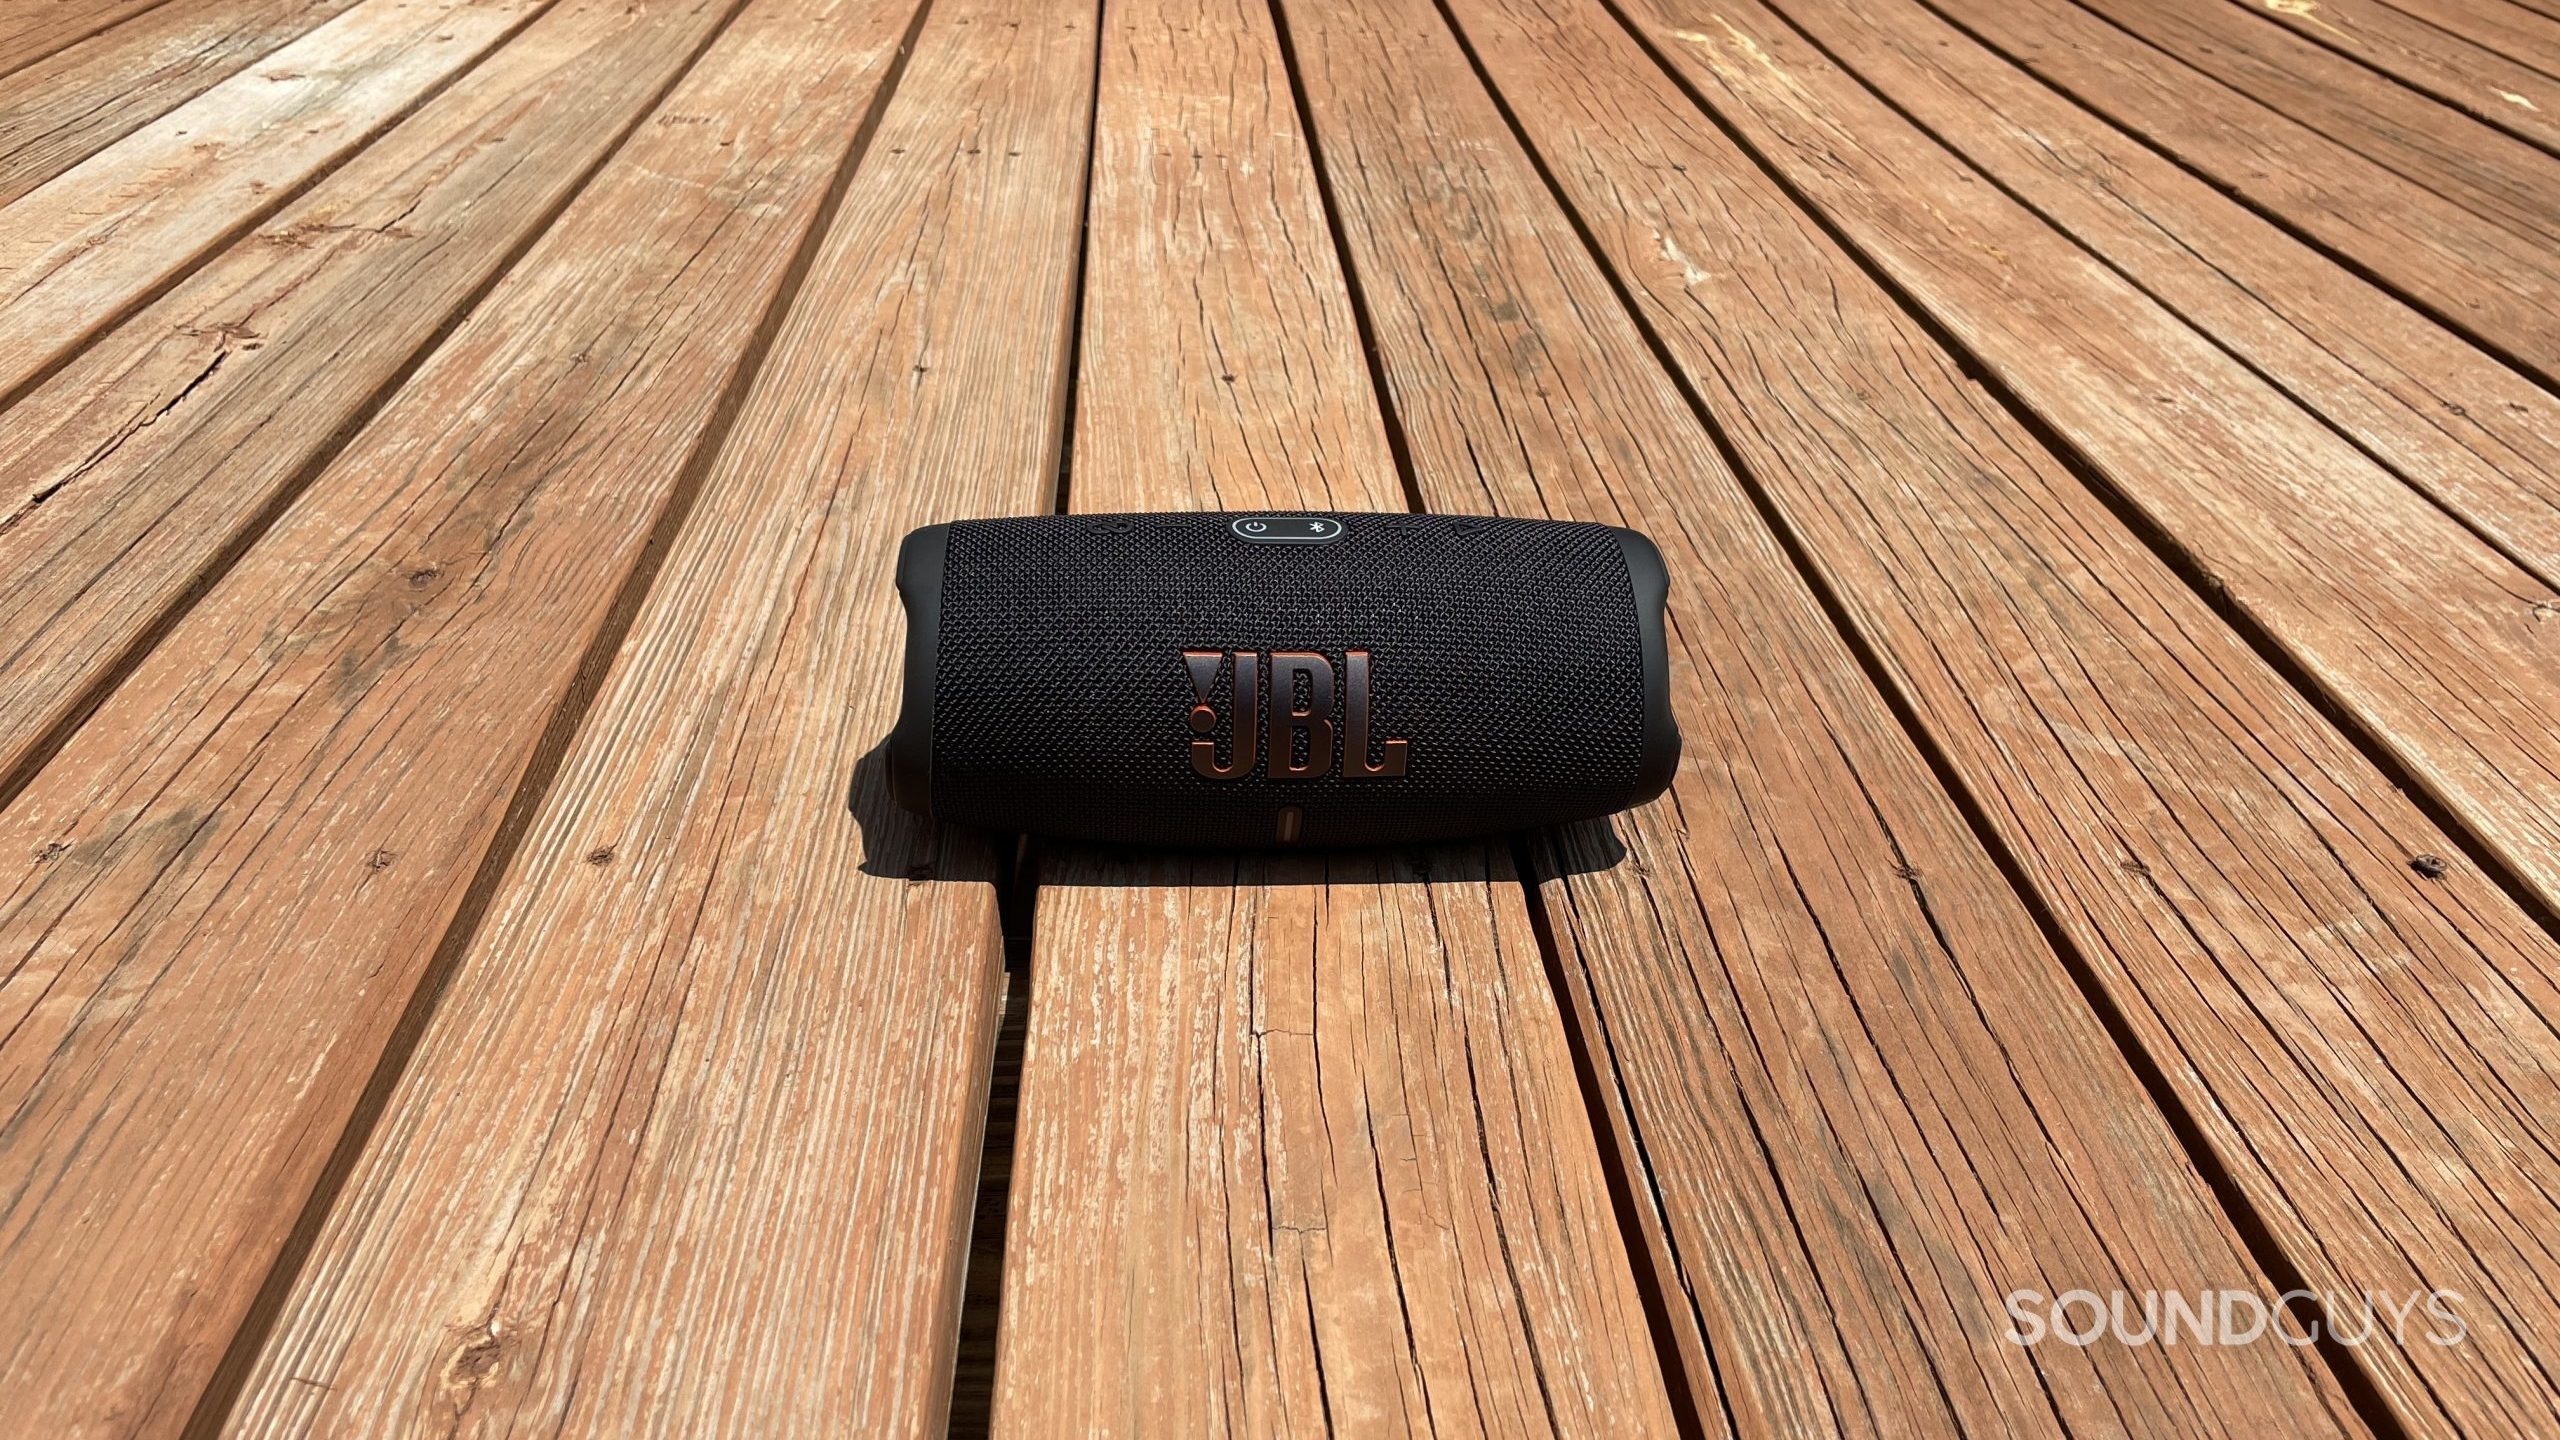 The JBL Charge 5 Bluetooth speaker on a balcony.